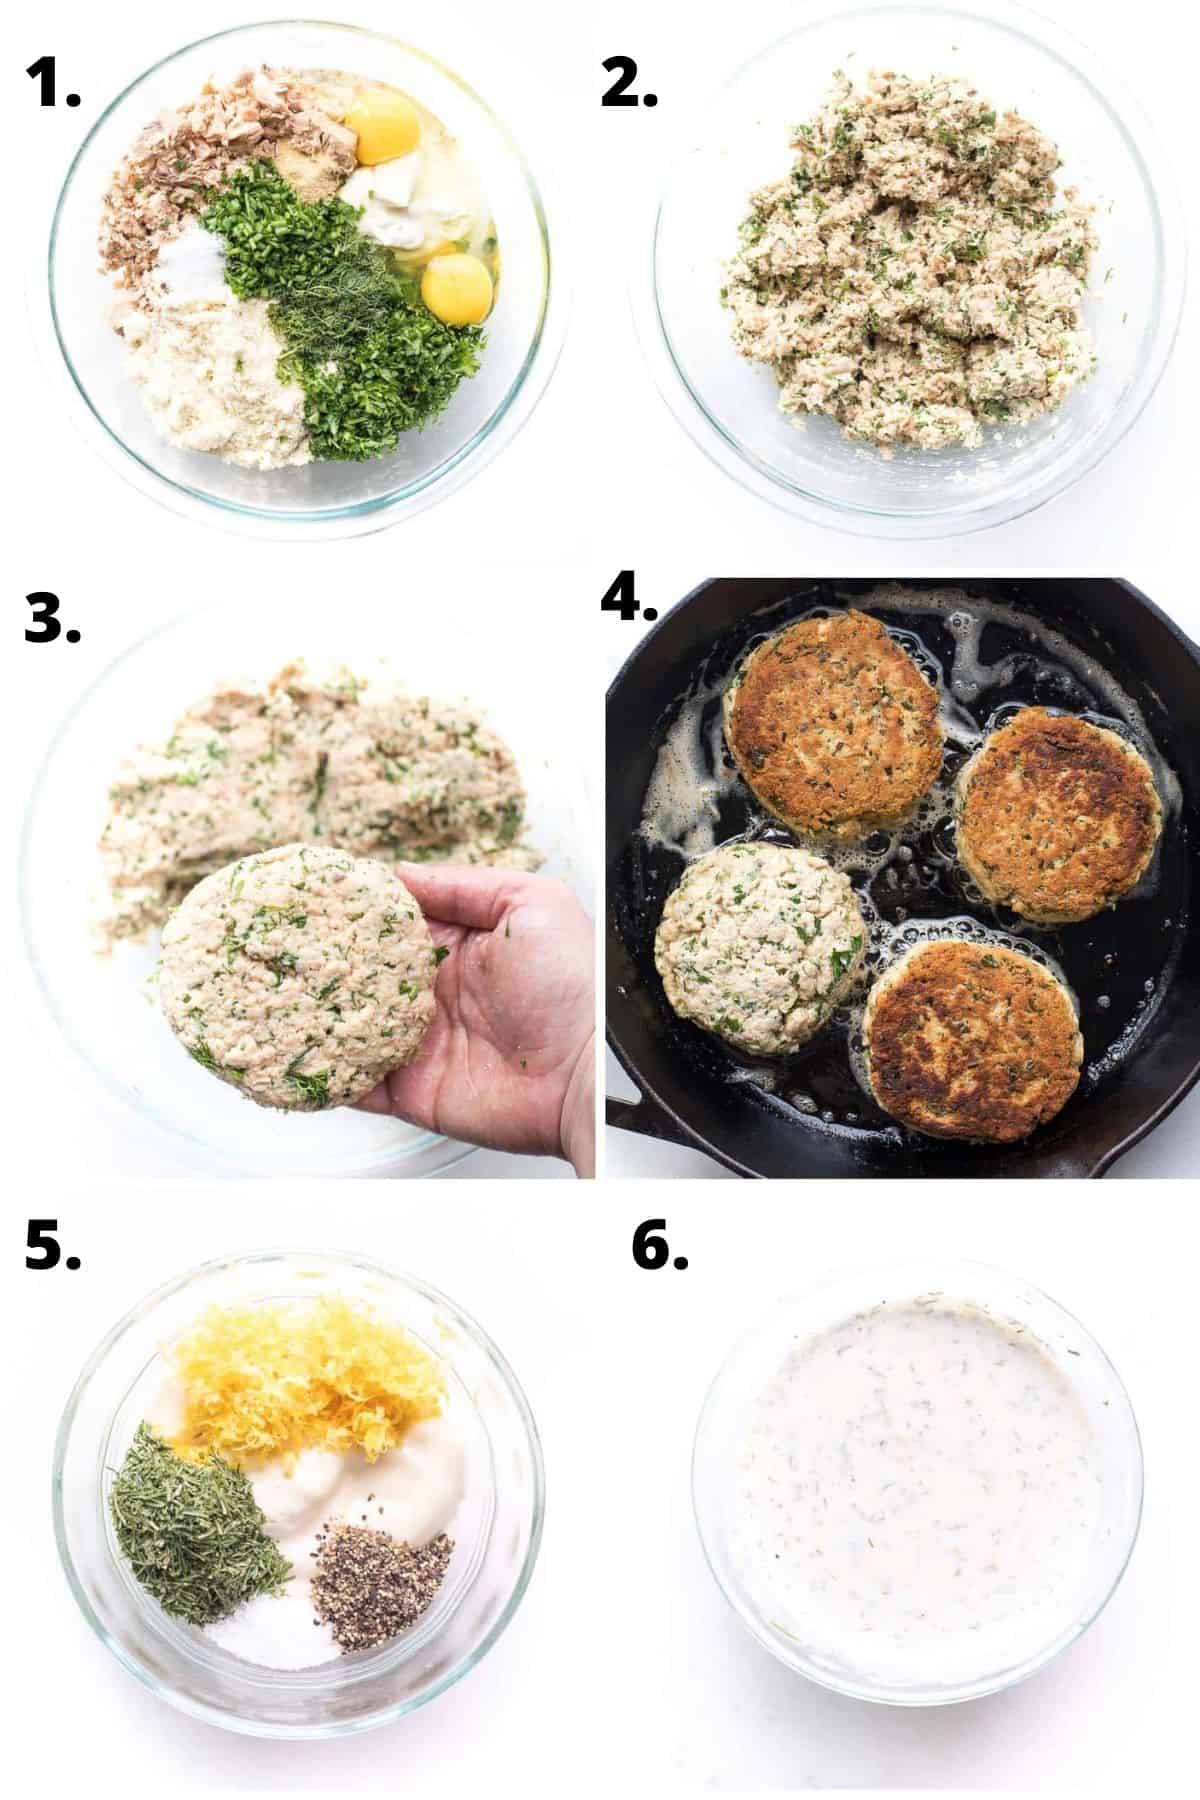 numbered step by step photos showing how to make keto salmon patties